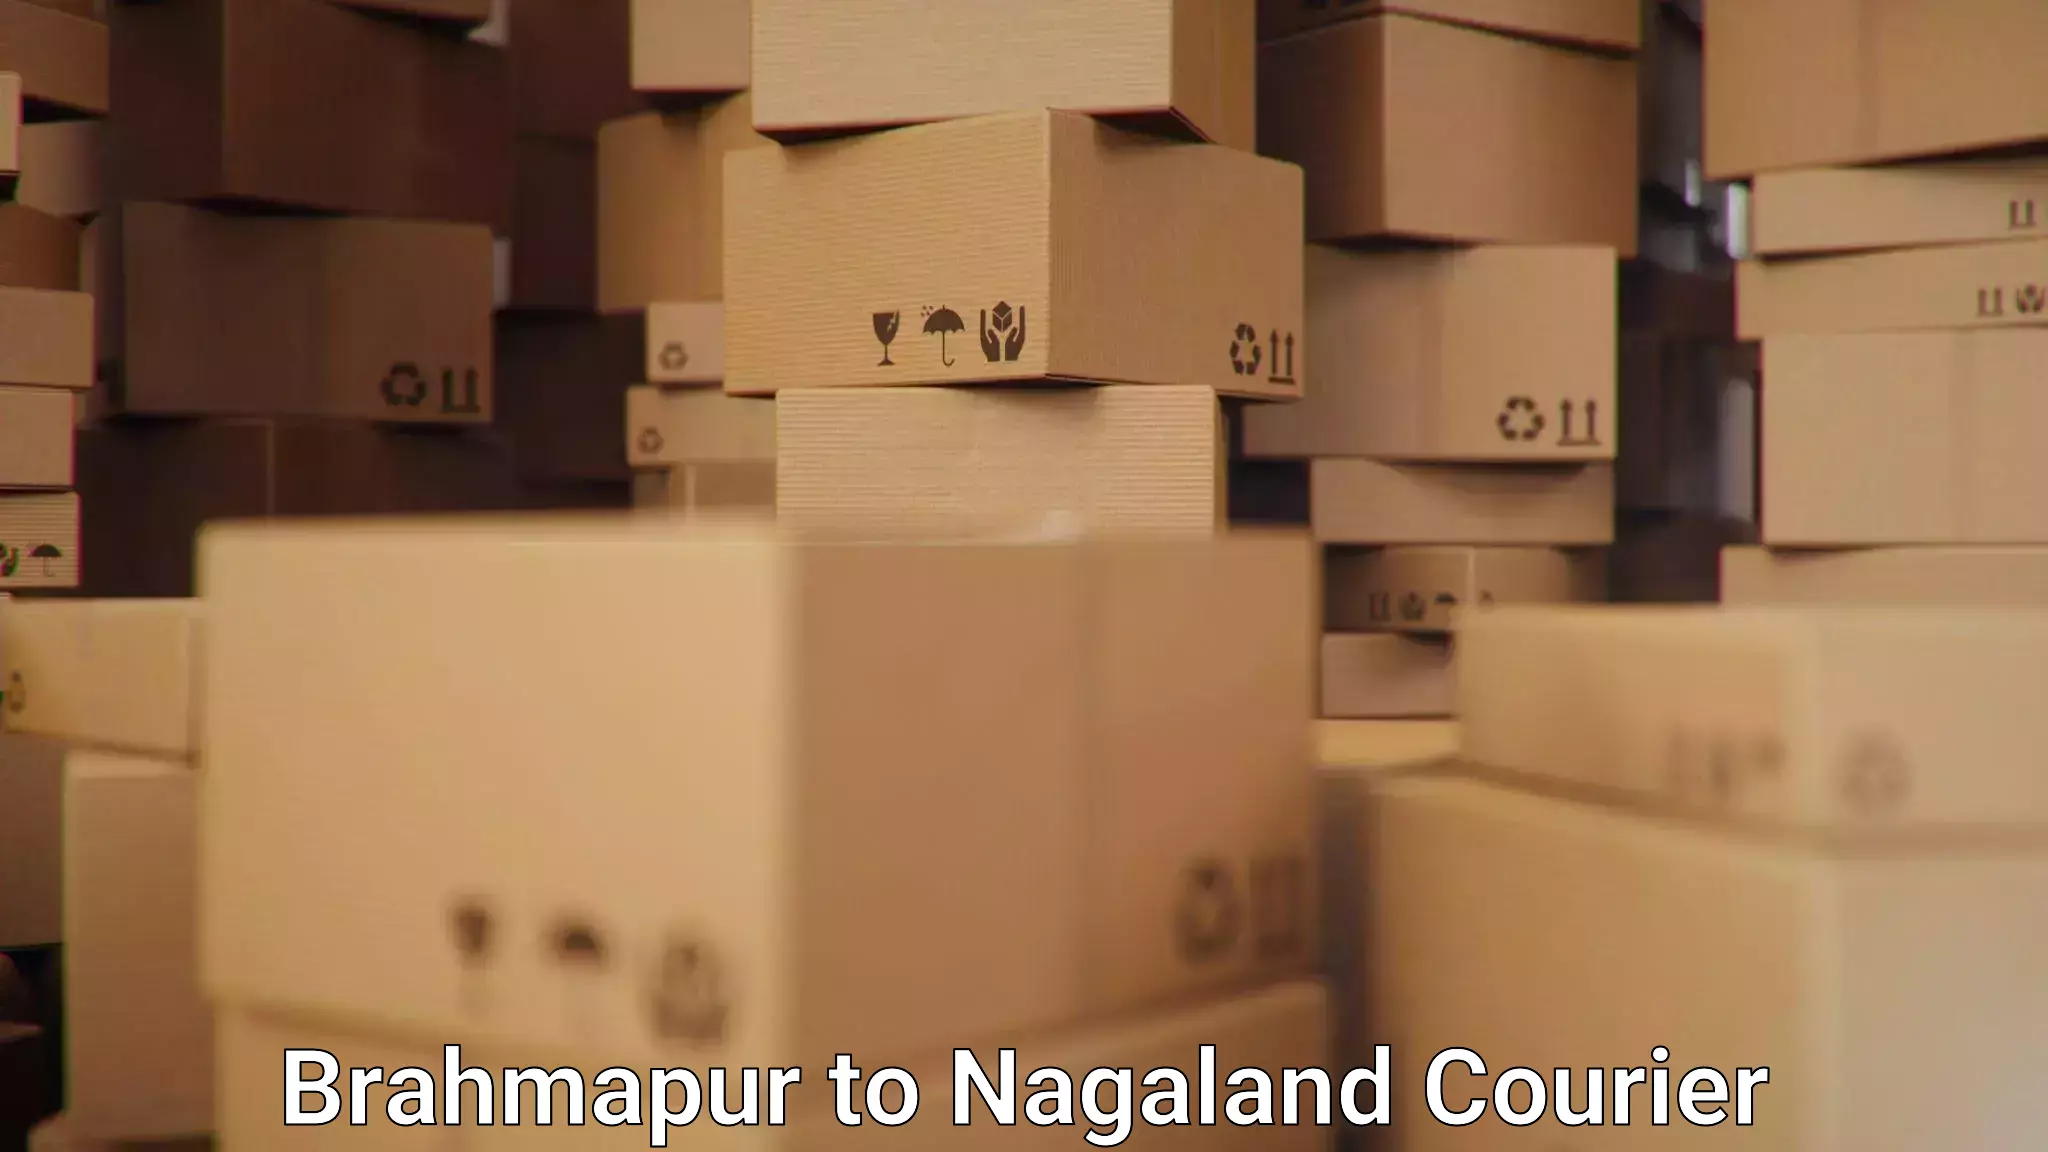 Global shipping solutions Brahmapur to Nagaland